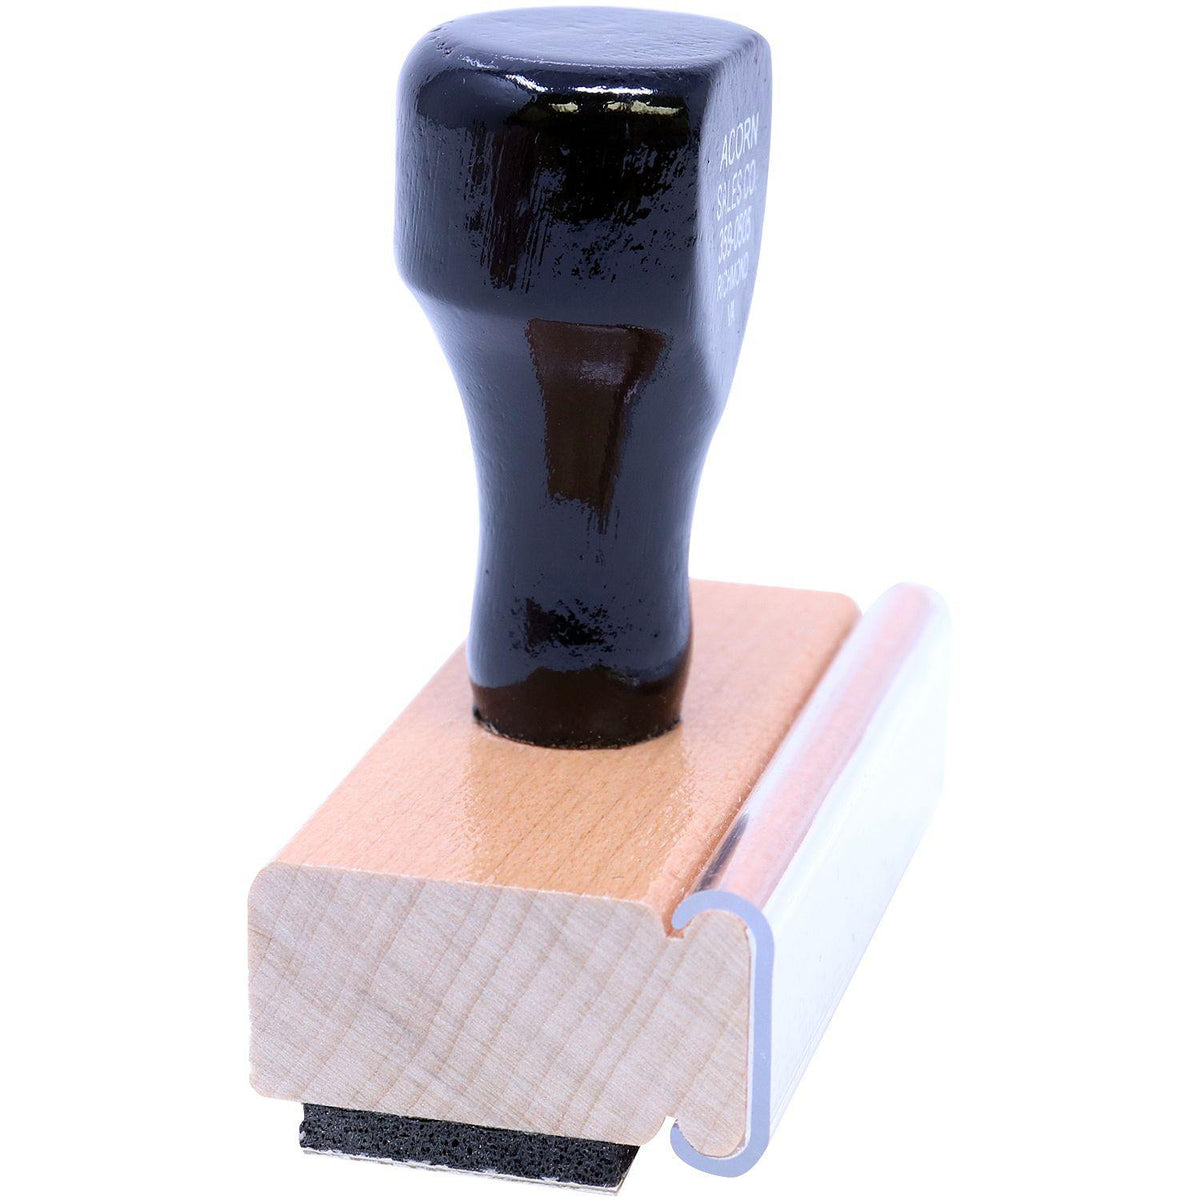 Side View of Large Remitido Rubber Stamp at an Angle